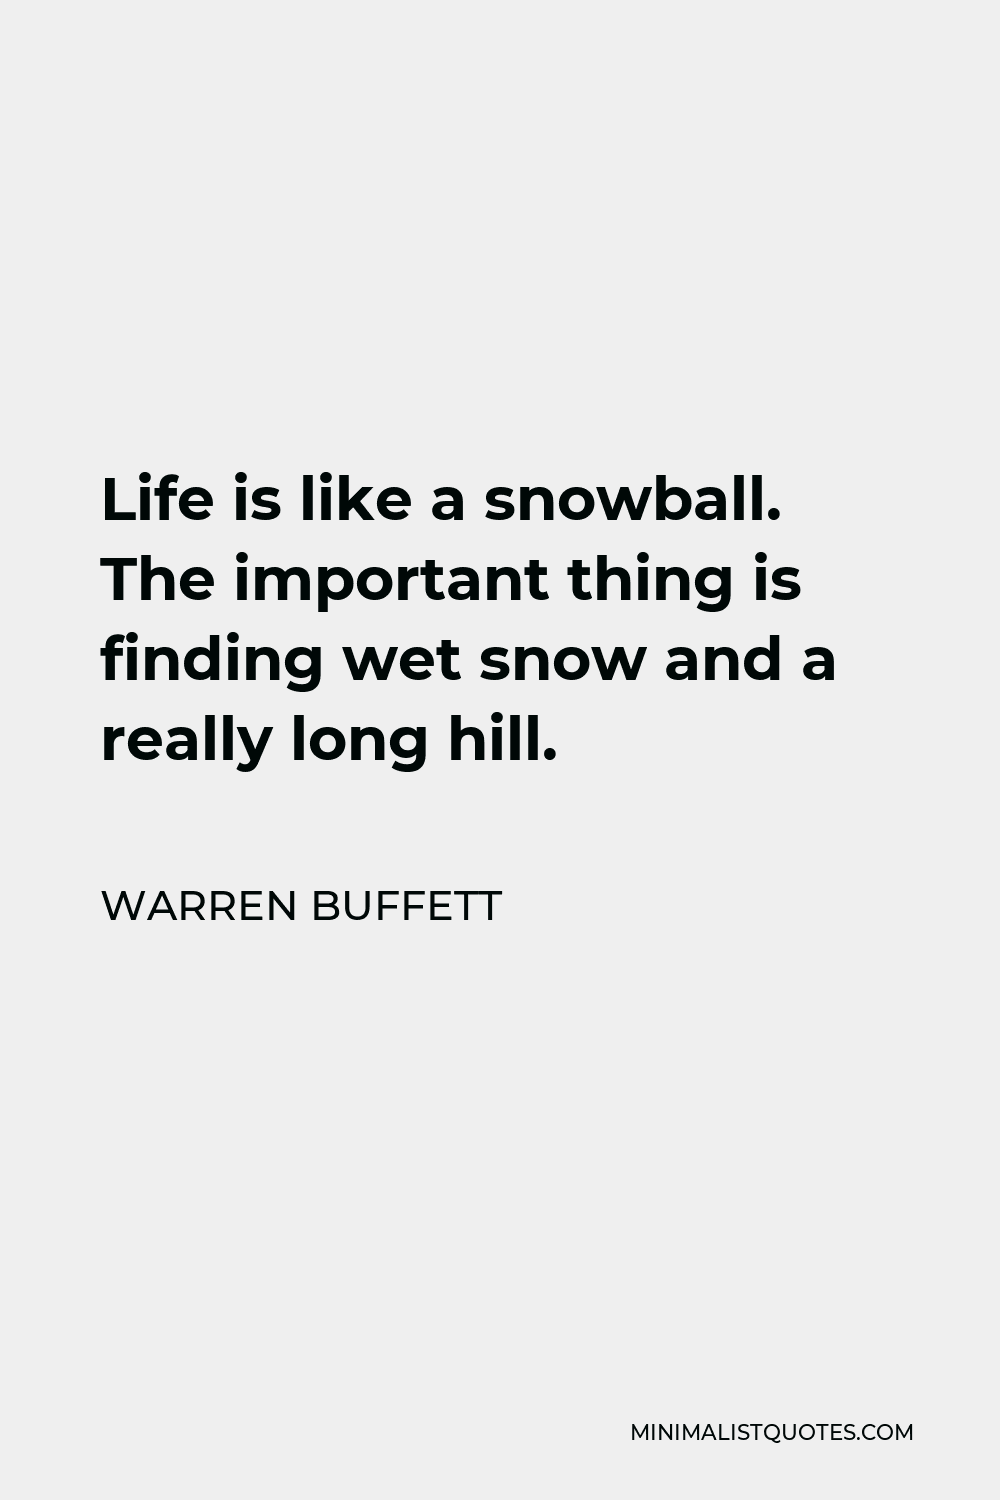 Warren Buffett Quote - Life is like a snowball. The important thing is finding wet snow and a really long hill.